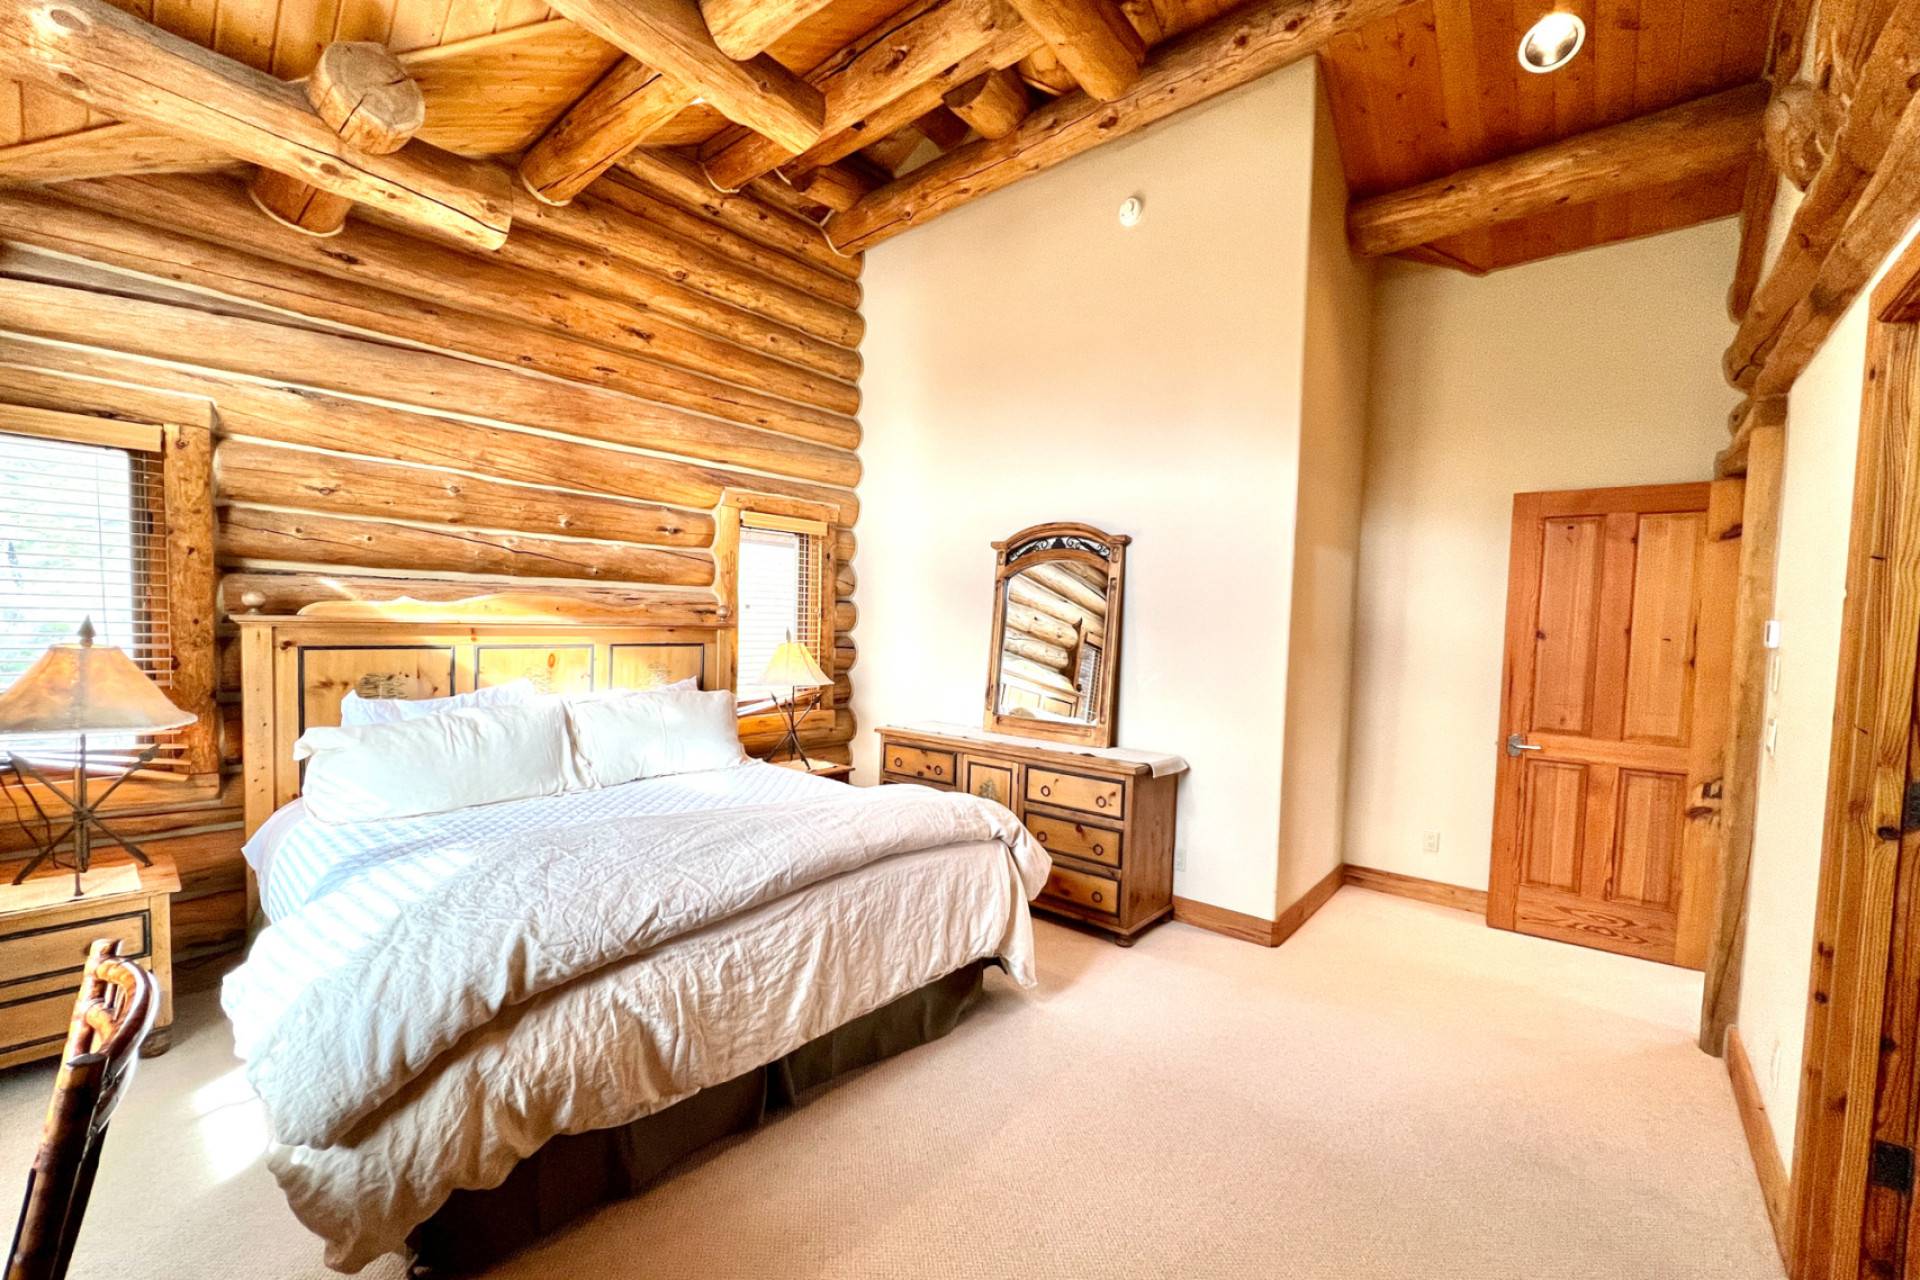 Luxury Mtn Log Home, Spacious/Serene/Picturesque w/Private Hot Tub, 2 Masters, 10 min to Telluride